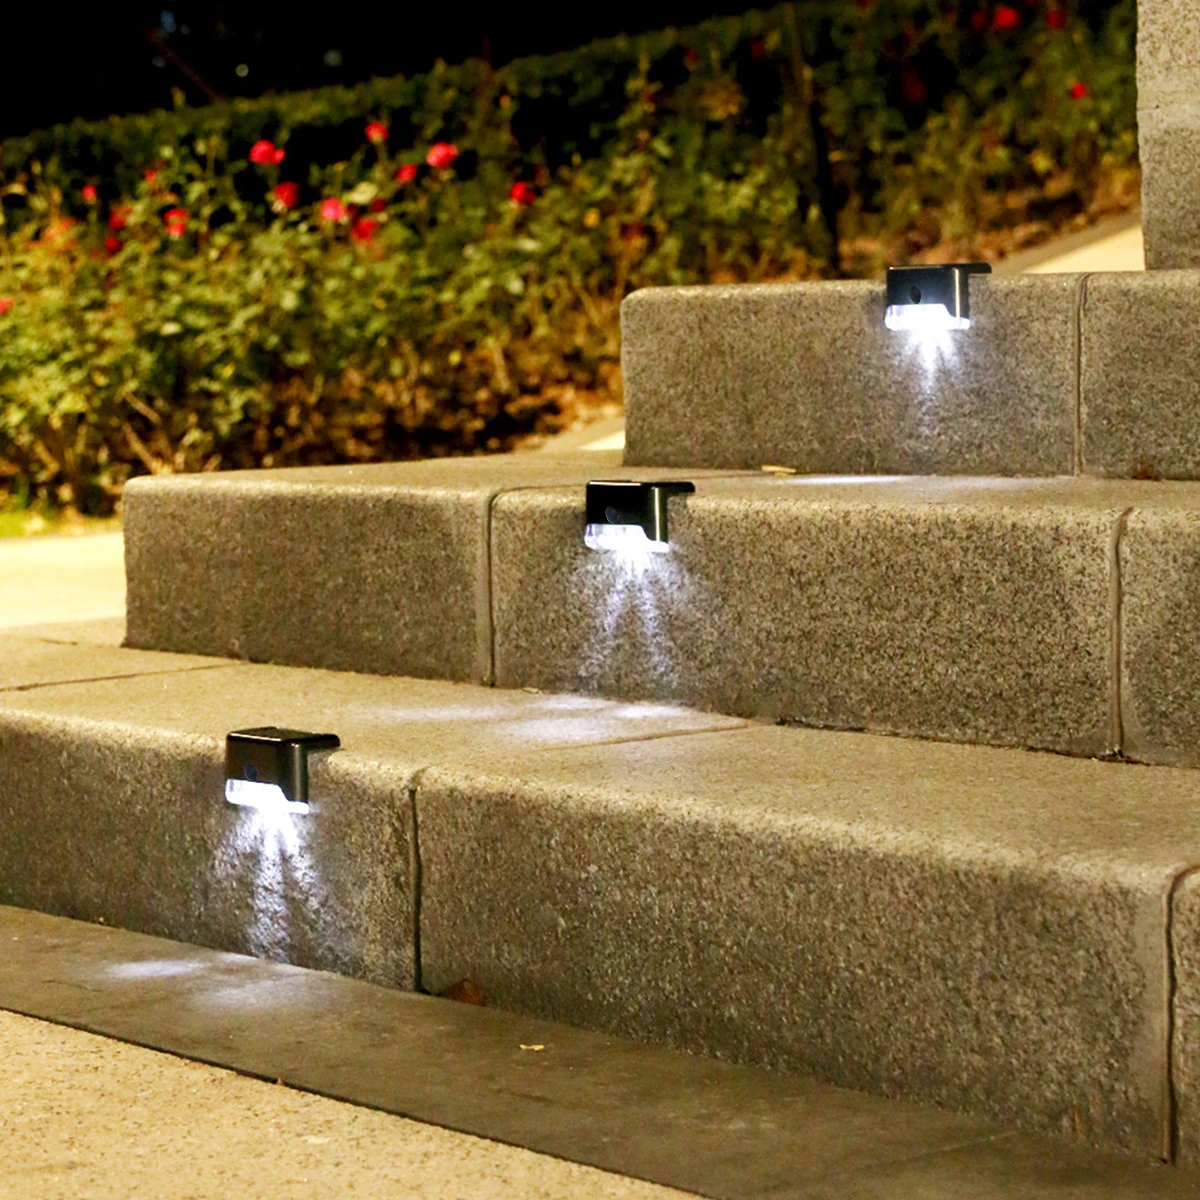 

Deck Lamp LED Solar Stair Lamp IP65 Waterproof Outdoor Garden Pathway Yard Patio Stairs Steps Fence Lamps Solar Night Light